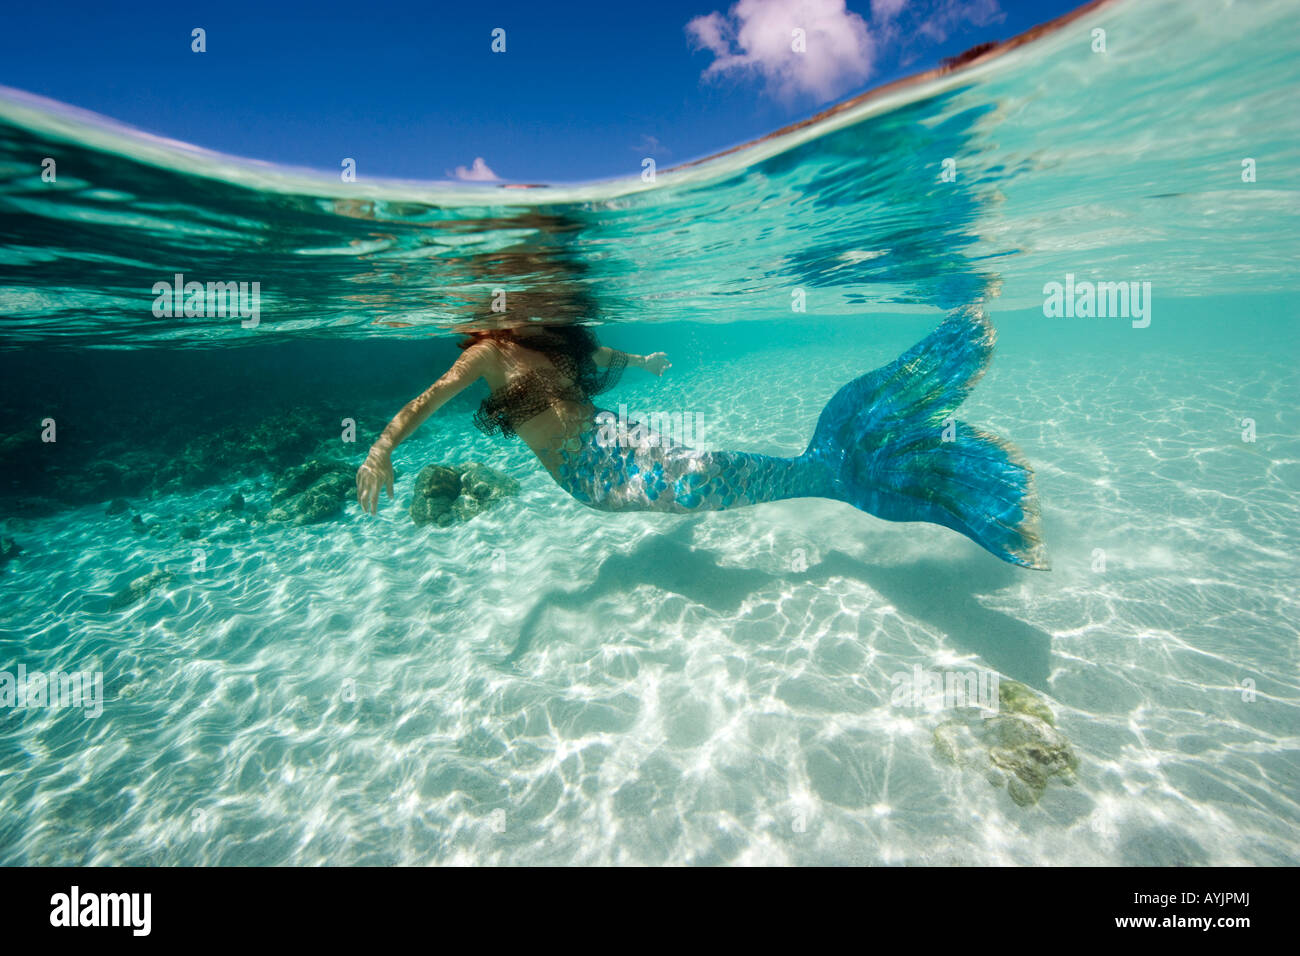 Mermaid in shallow water at surface Bonaire Netherland Antillies Stock Photo